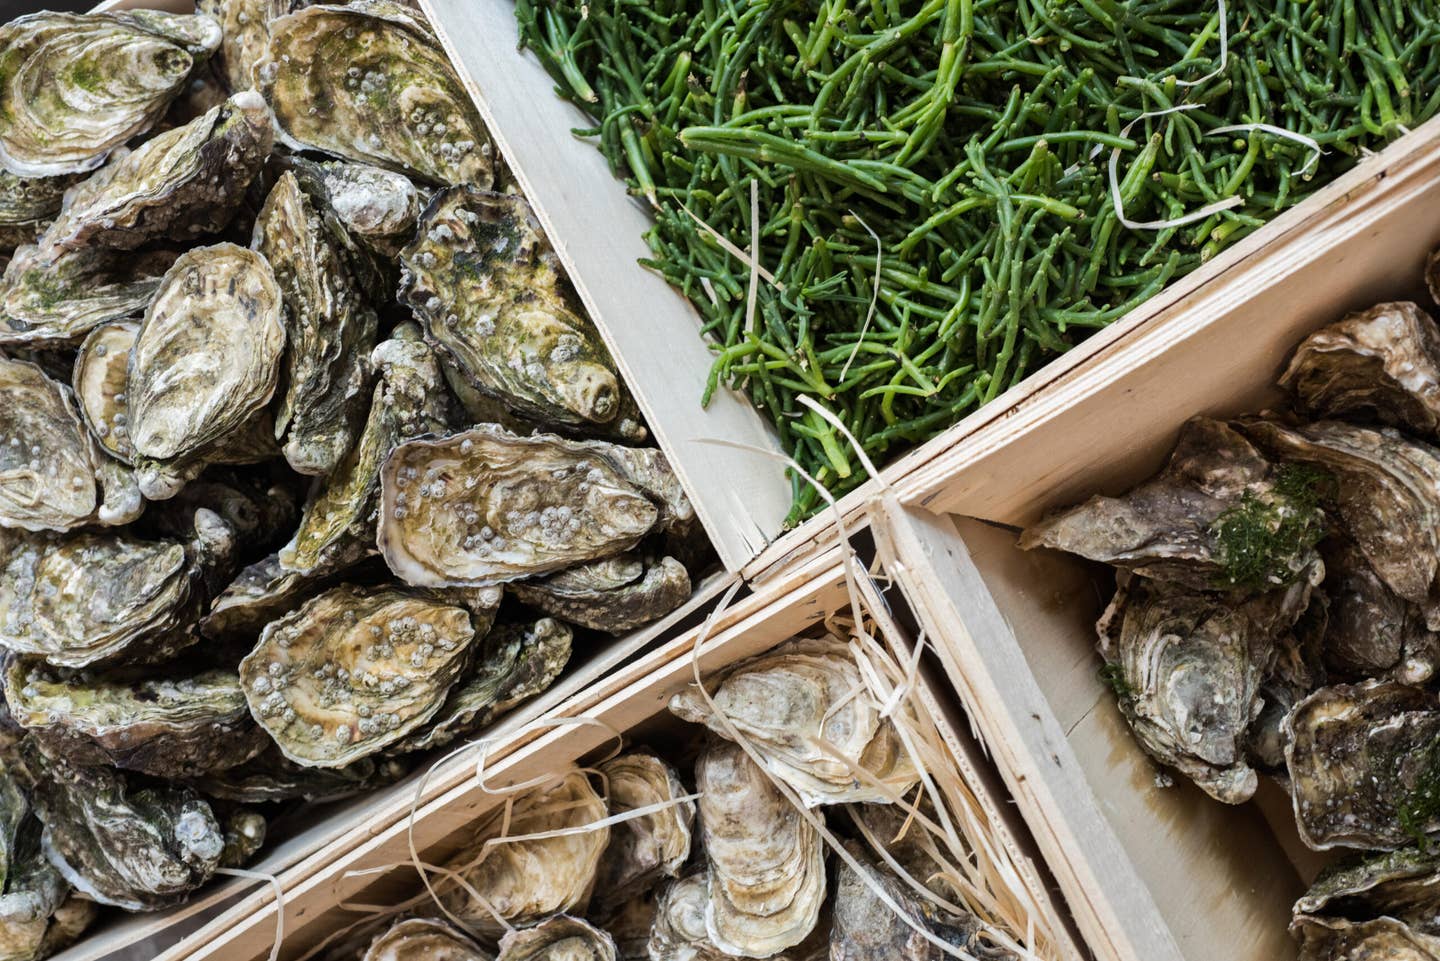 Raw Bar Season is Upon Us—Here’s What 3 French Wine Pros Pair With Their Oysters